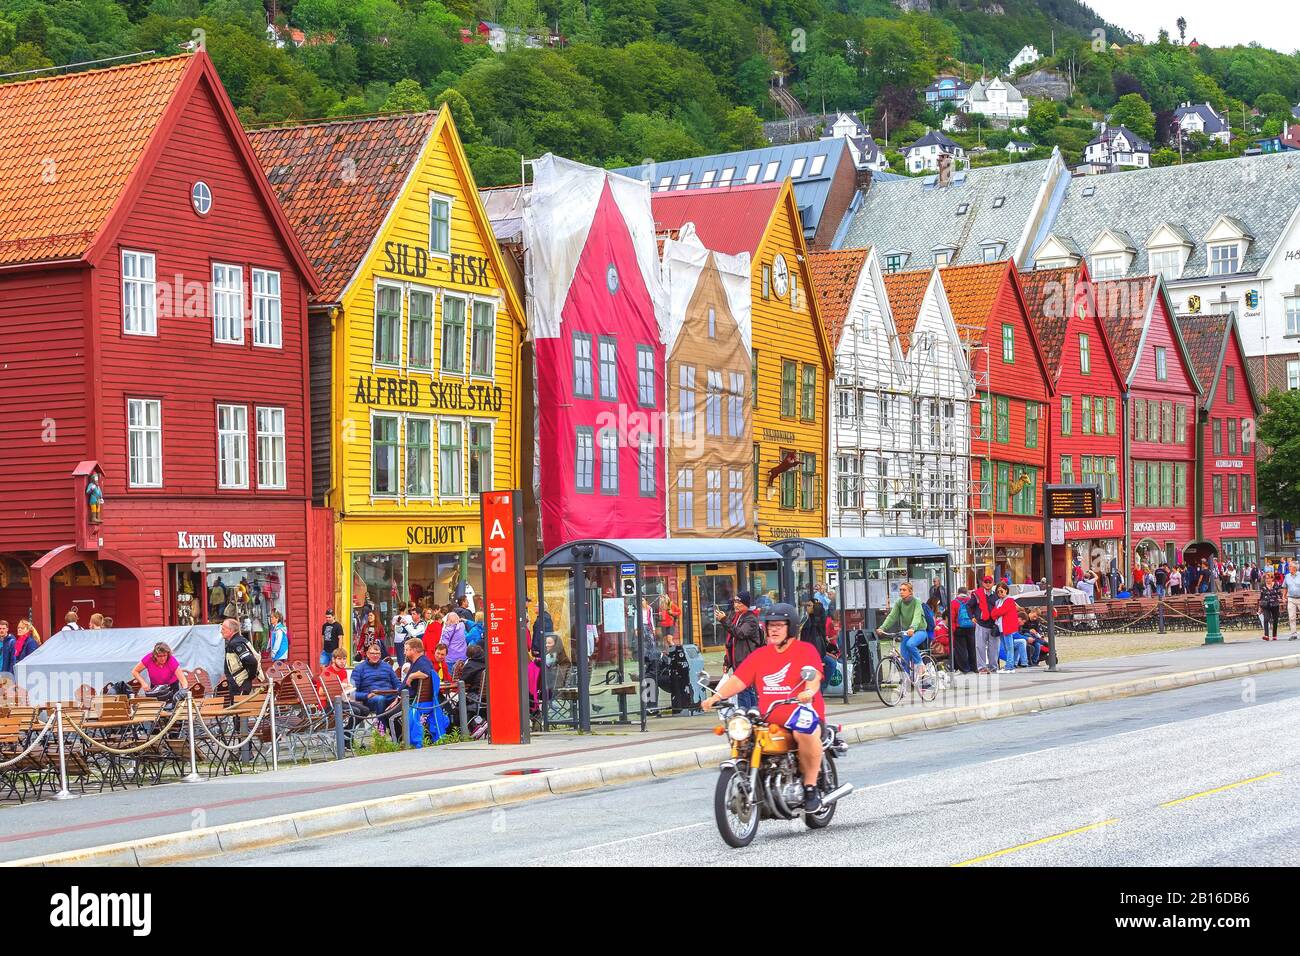 Bergen, Norway - July 30, 2018: City street view with Bryggen old wharf, people and colorful traditional houses Stock Photo